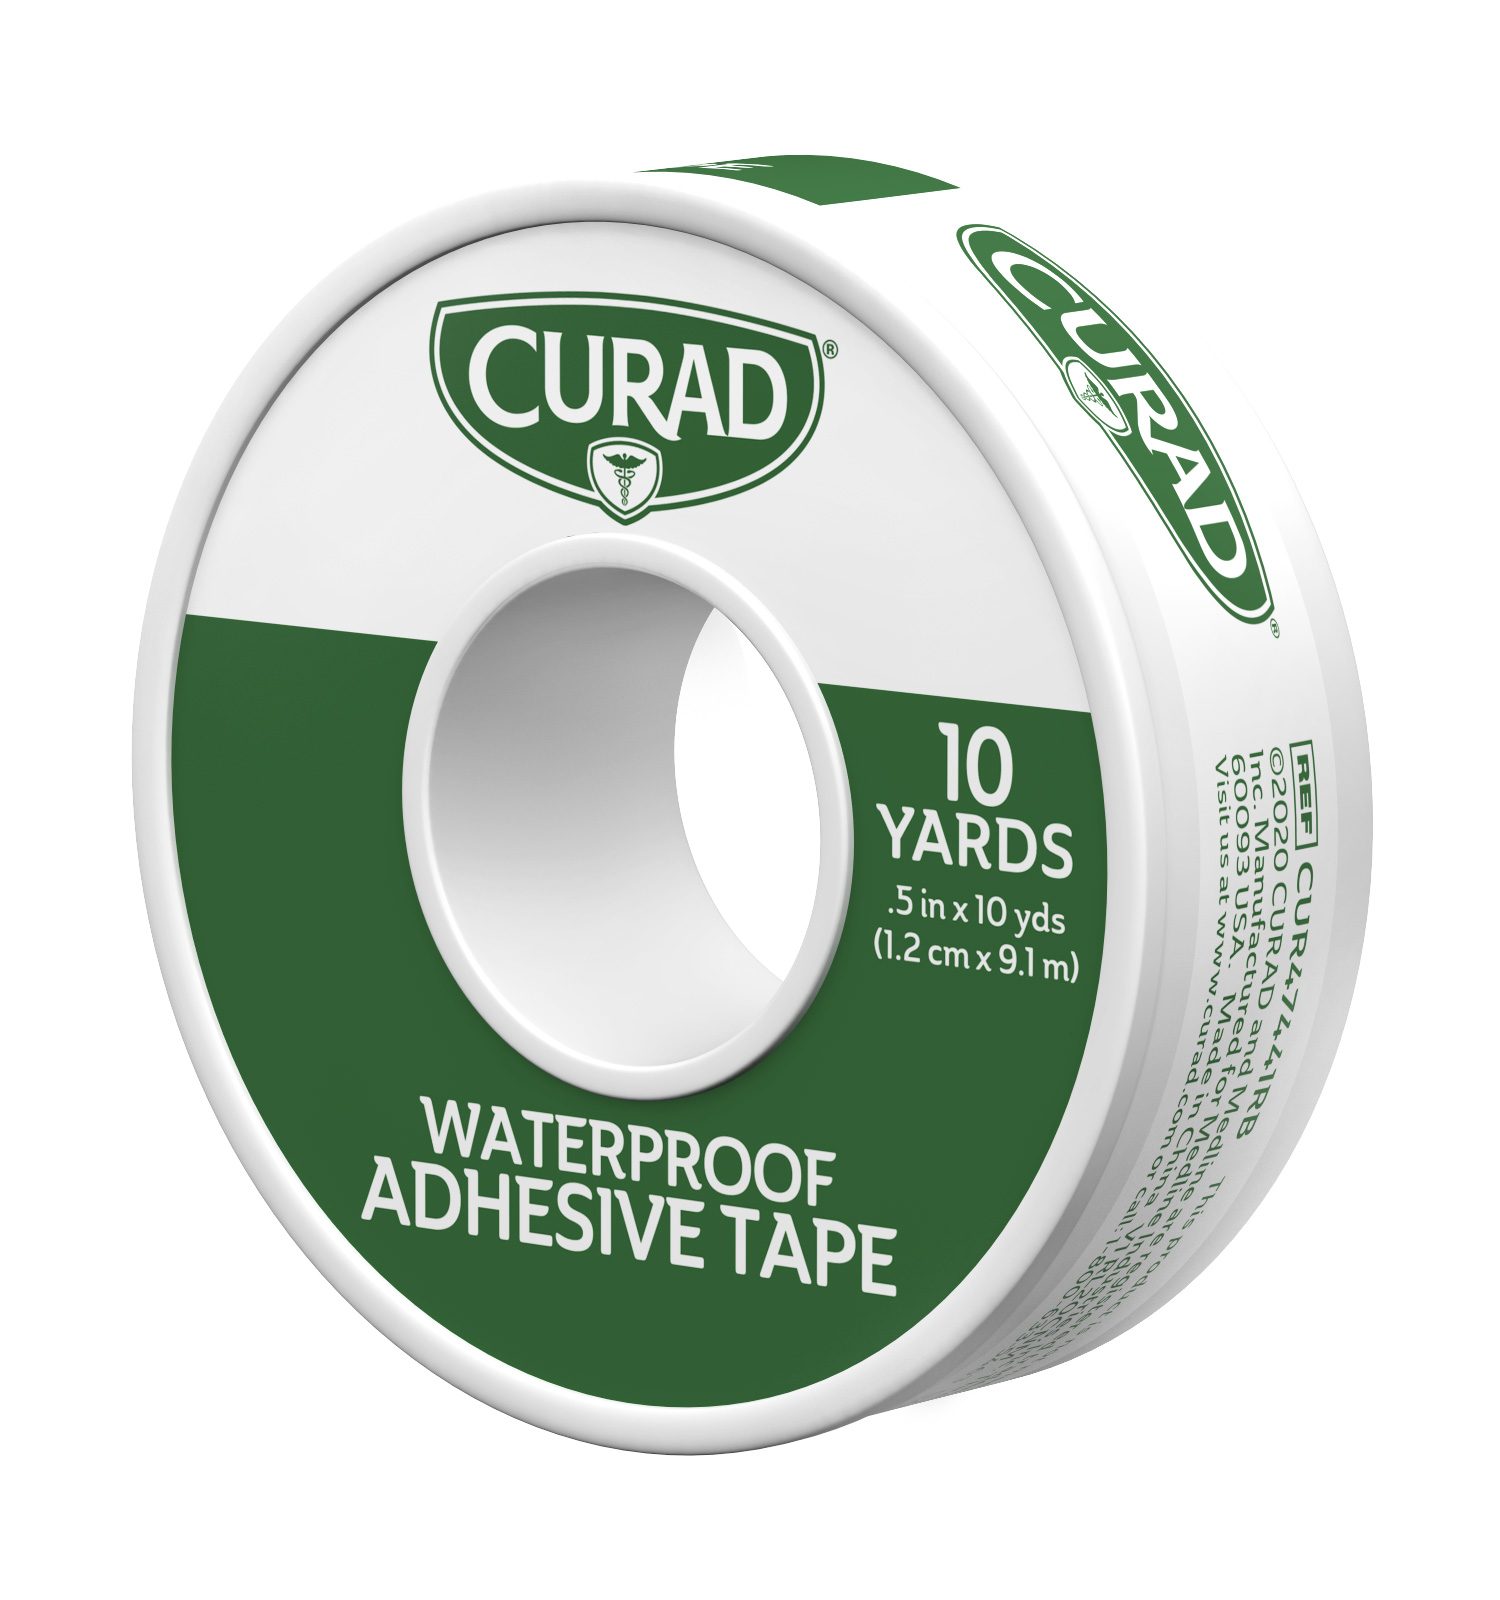 Curad Paper Adhesive Tape 1 x 10 yds White 12/Pack